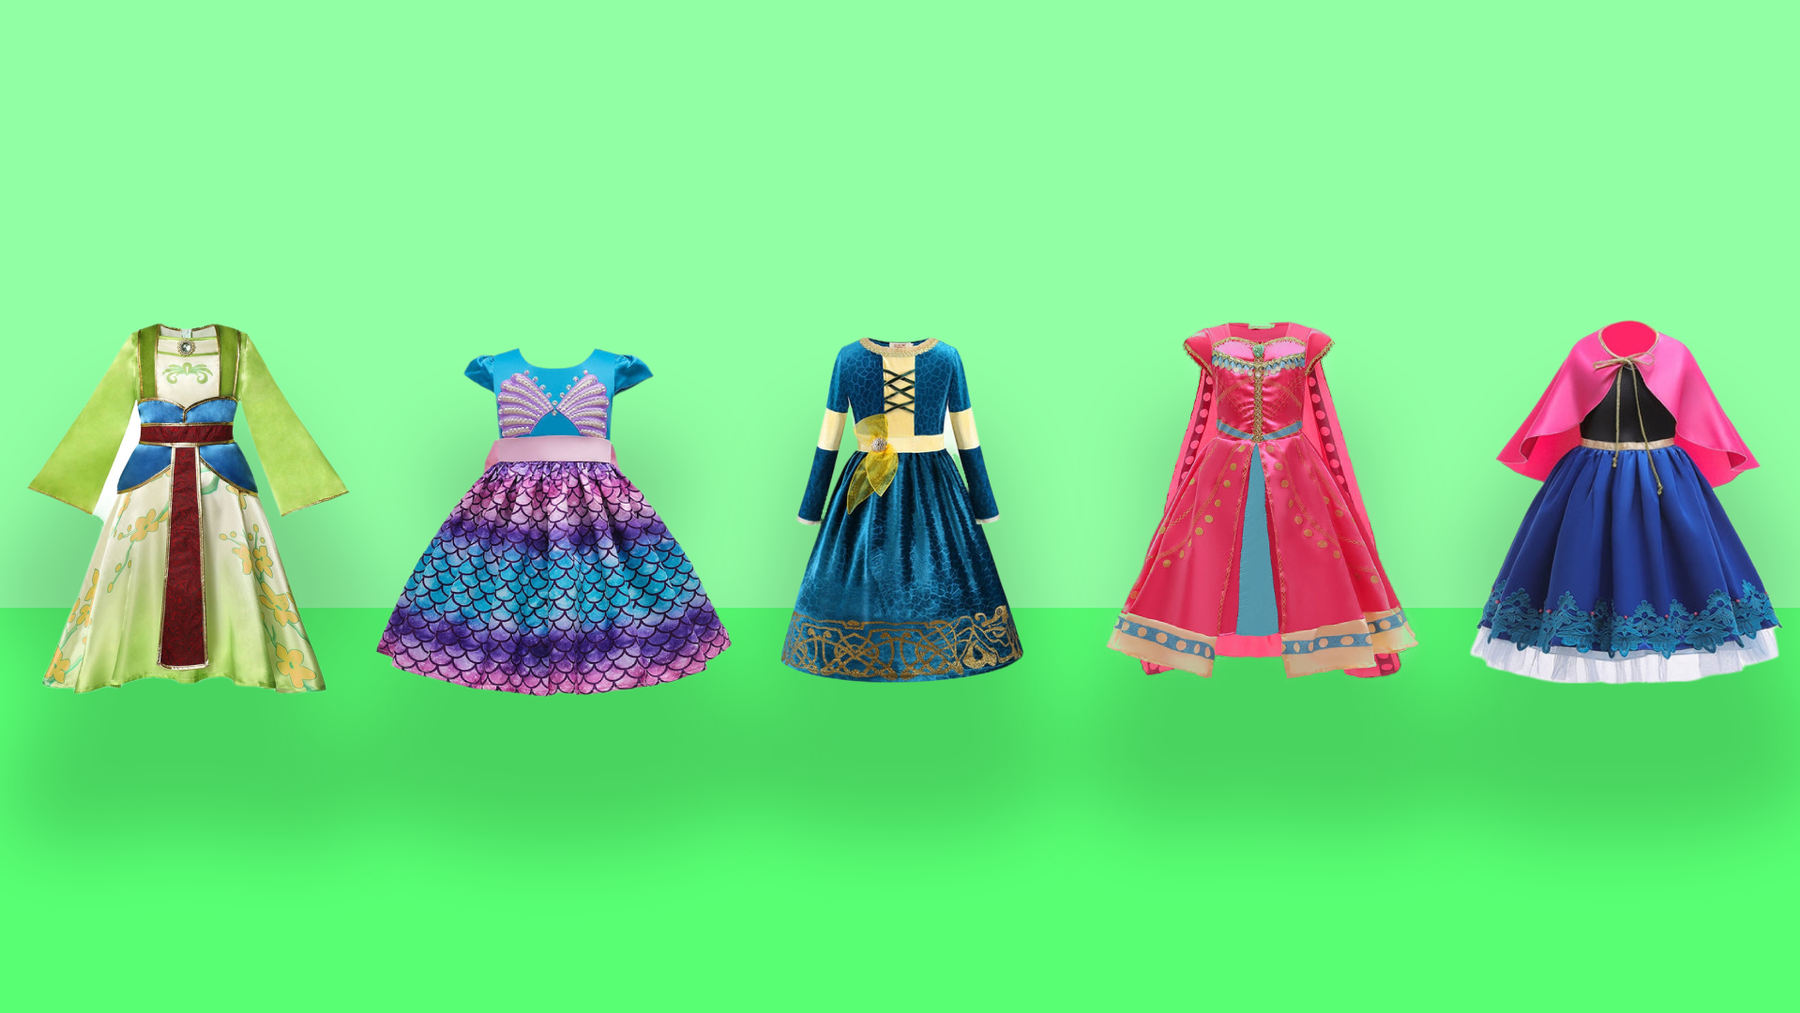 Enchanting Dress-Up: The Top 5 Most Whimsical Baby Girl's Fantasy Costumes for Your Little Girl